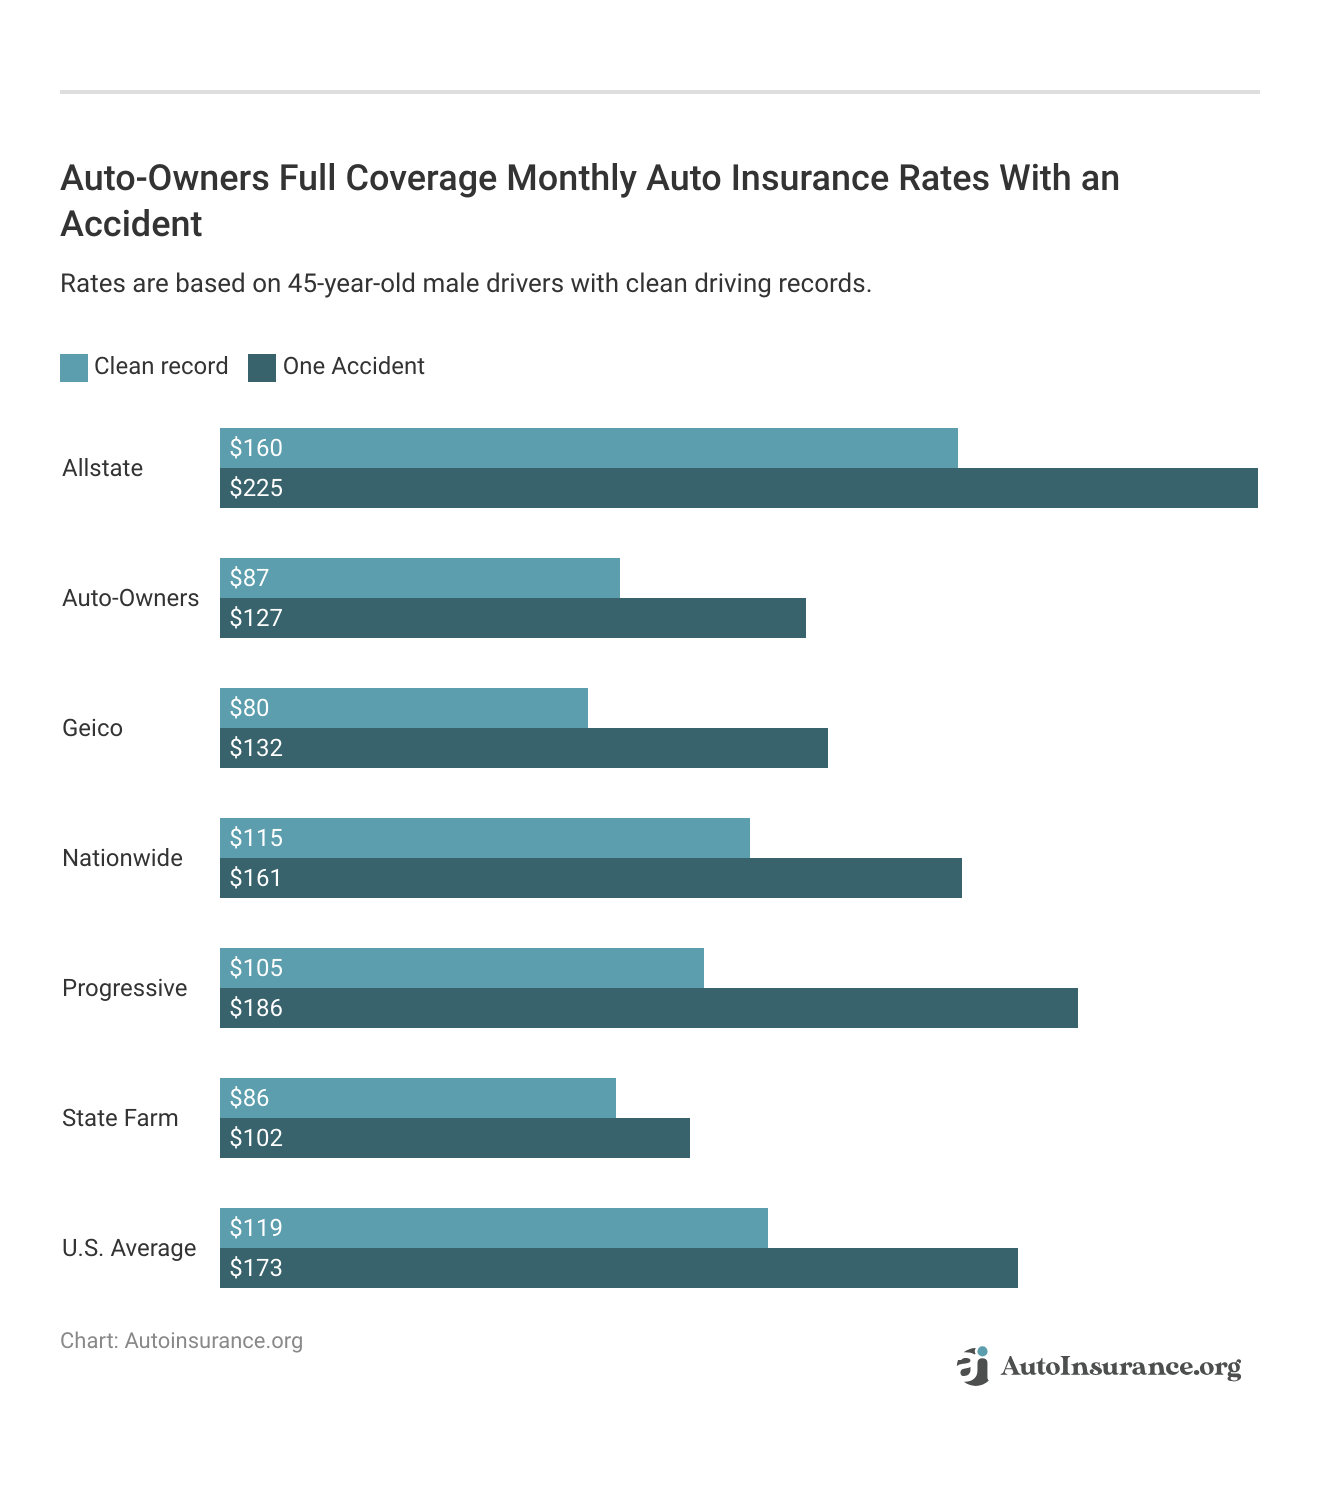 <h3>Auto-Owners Full Coverage Monthly Auto Insurance Rates With an Accident</h3>